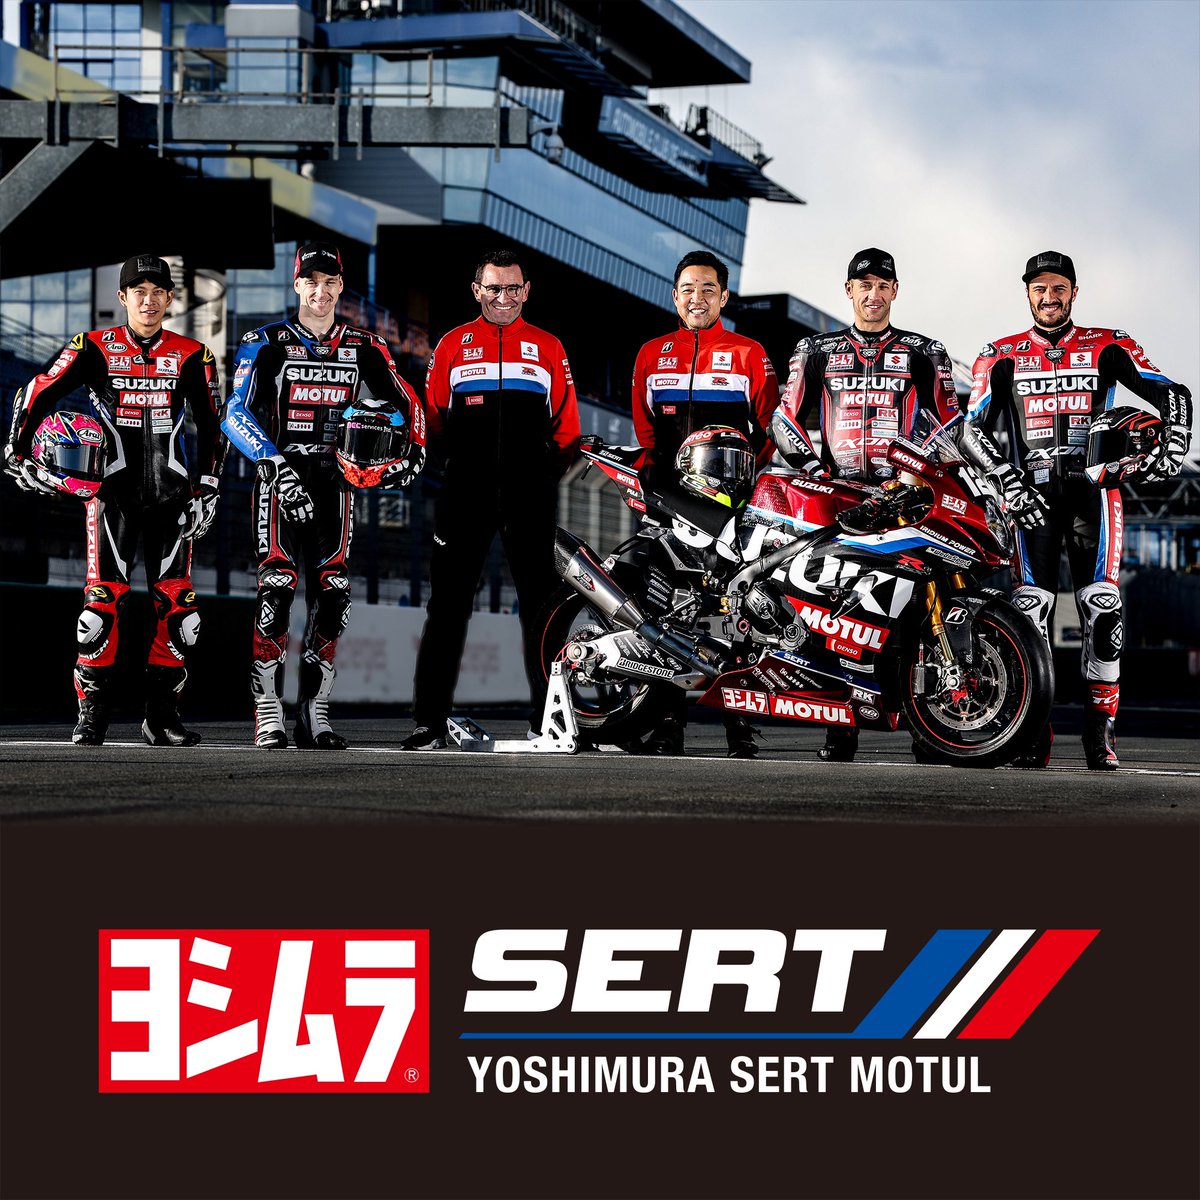 Yoshimura SERT Motul takes second position on the grid for the opening round of the 2024 @FIM_EWC. The team lines up for the start of the @24heuresmotos at Le Mans in a strong position and starts its 2024 EWC onslaught with four points in the team bank. #suzukigsxr1000r #suzuki